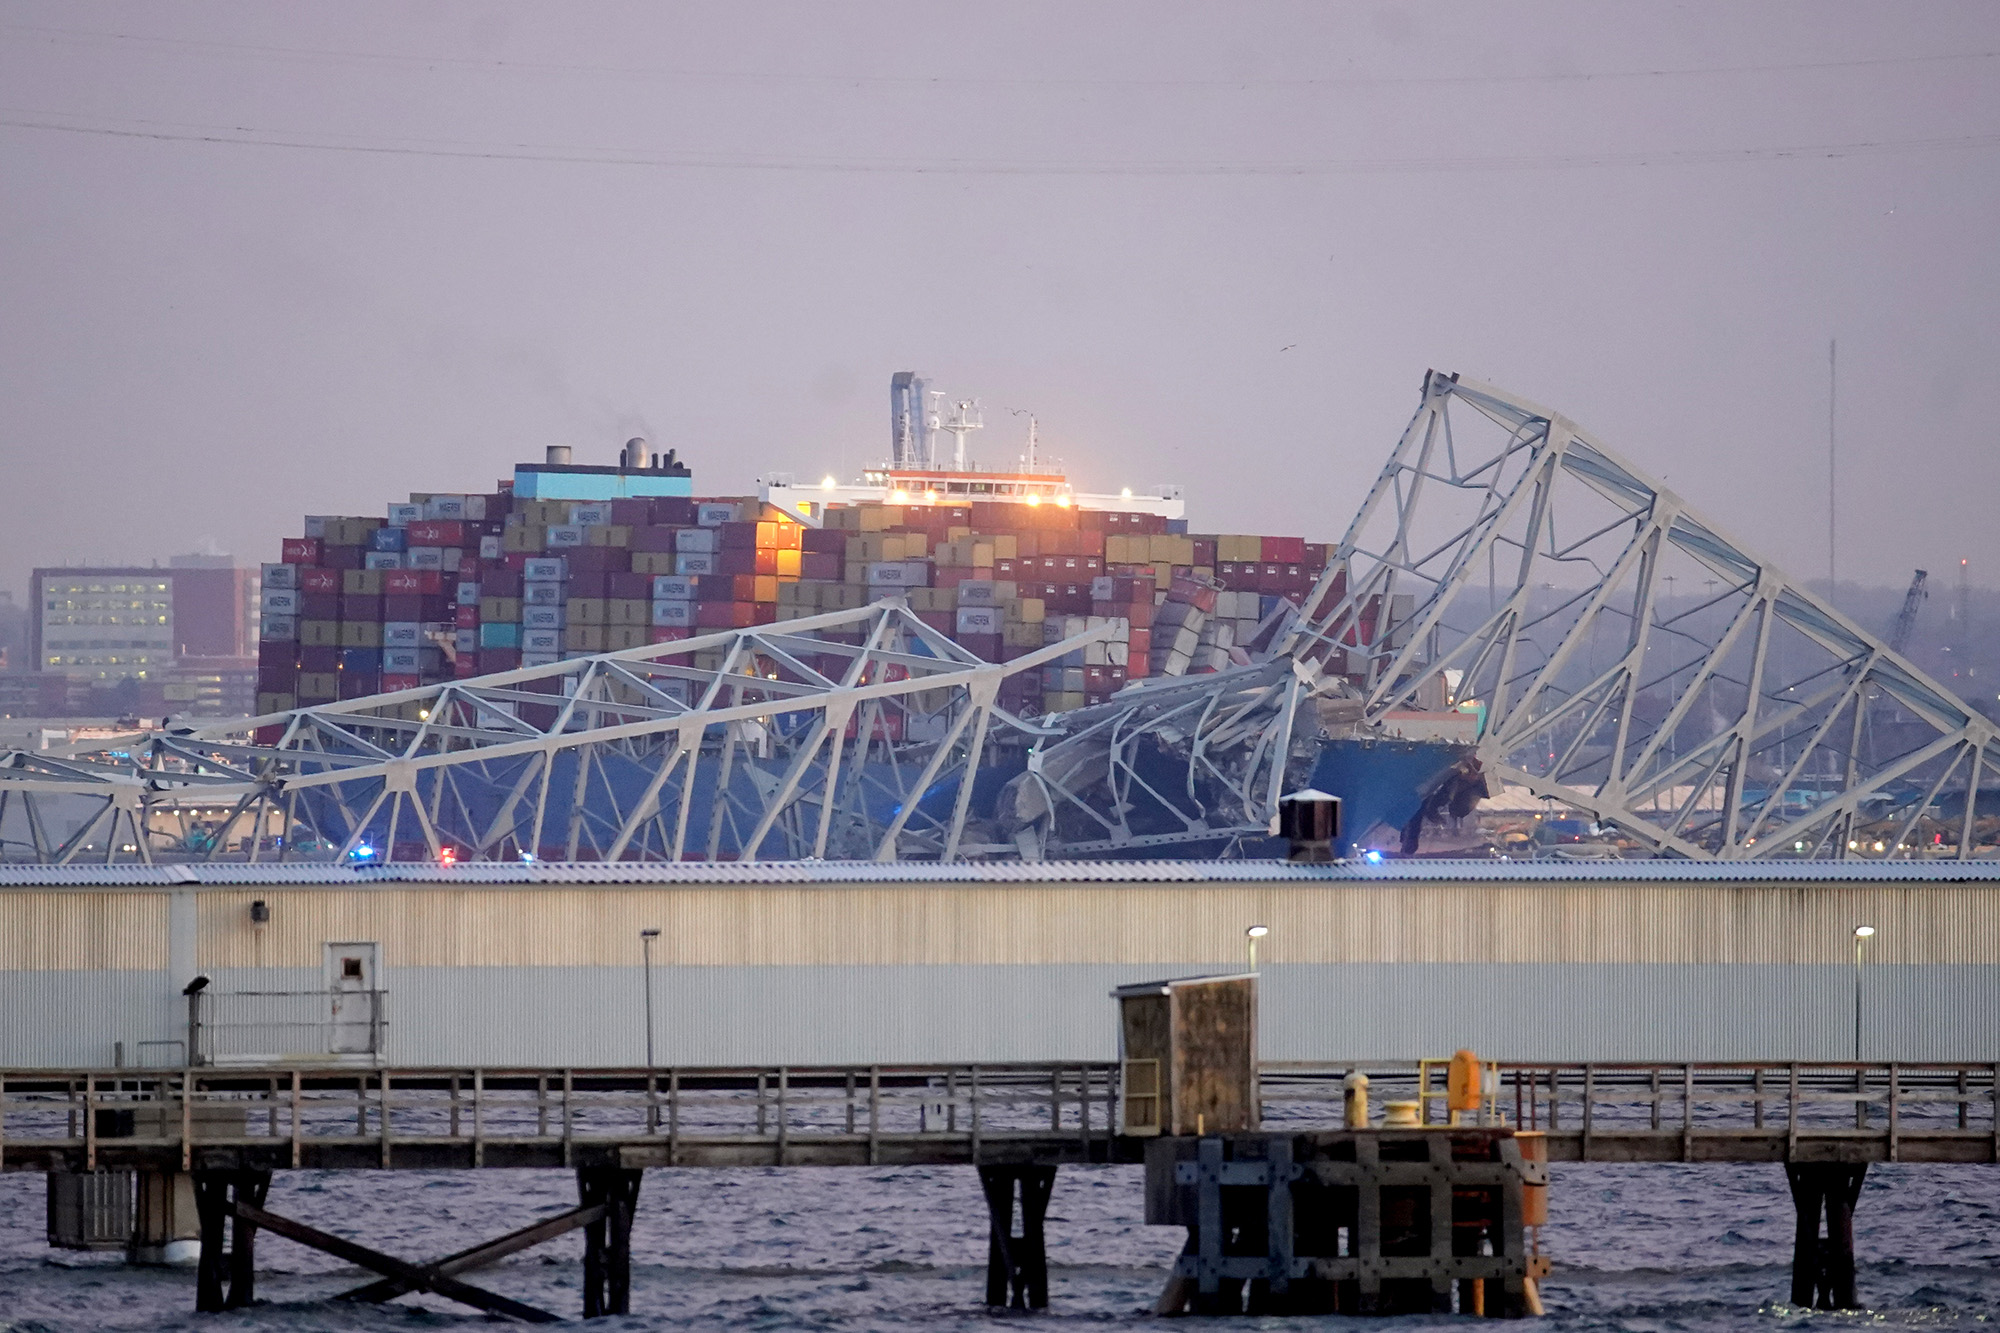 The Dali container vessel after striking the Francis Scott Key Bridge that collapsed into the Patapsco River in Baltimore, Maryland, US, on March 26.